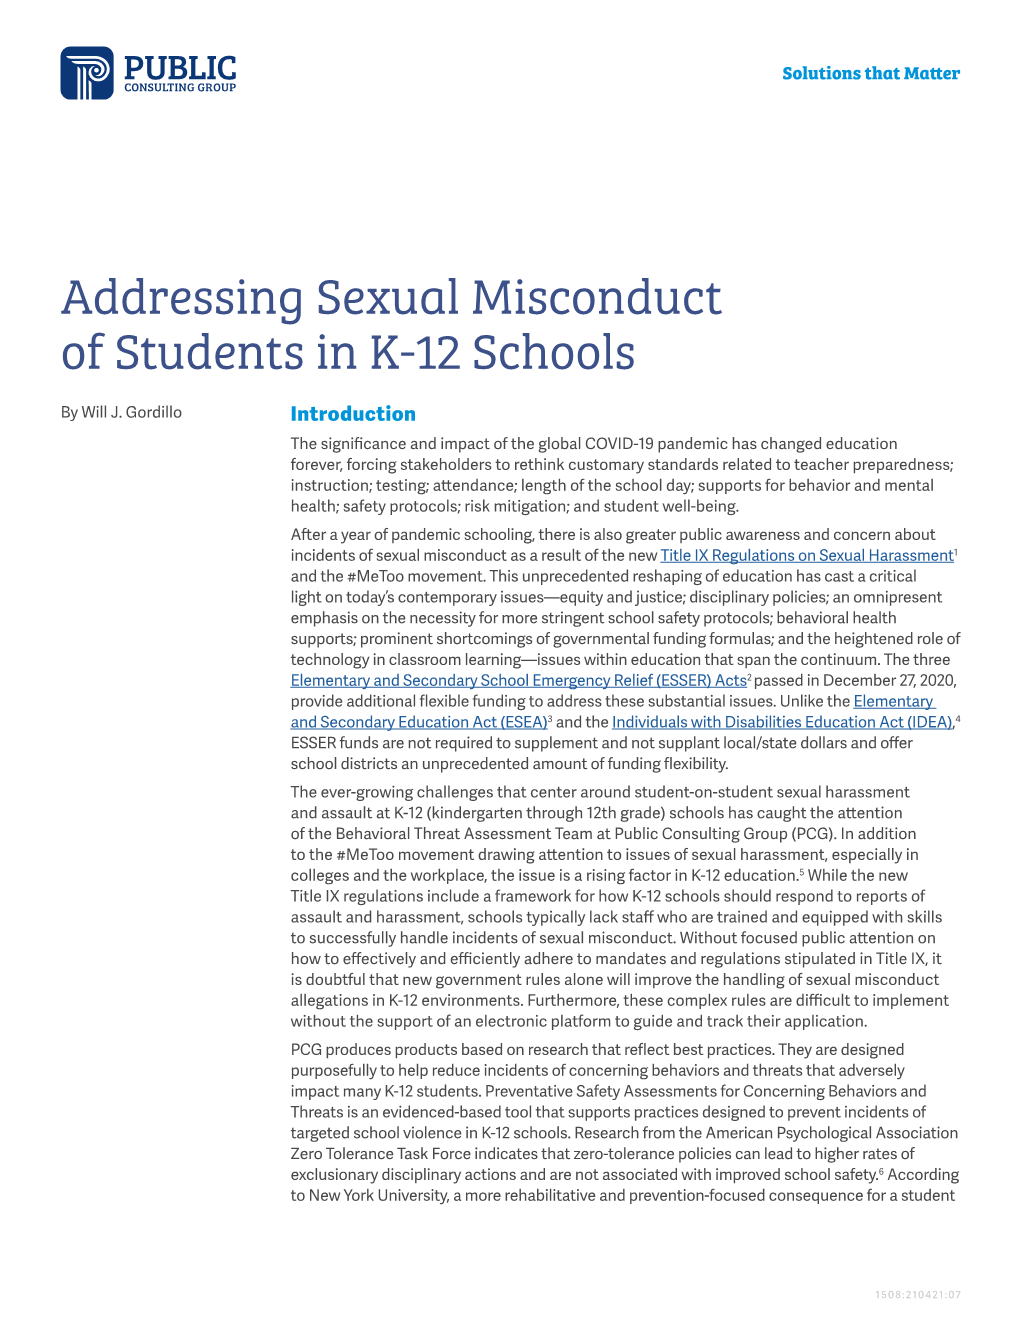 Addressing Sexual Misconduct of Students in K-12 Schools